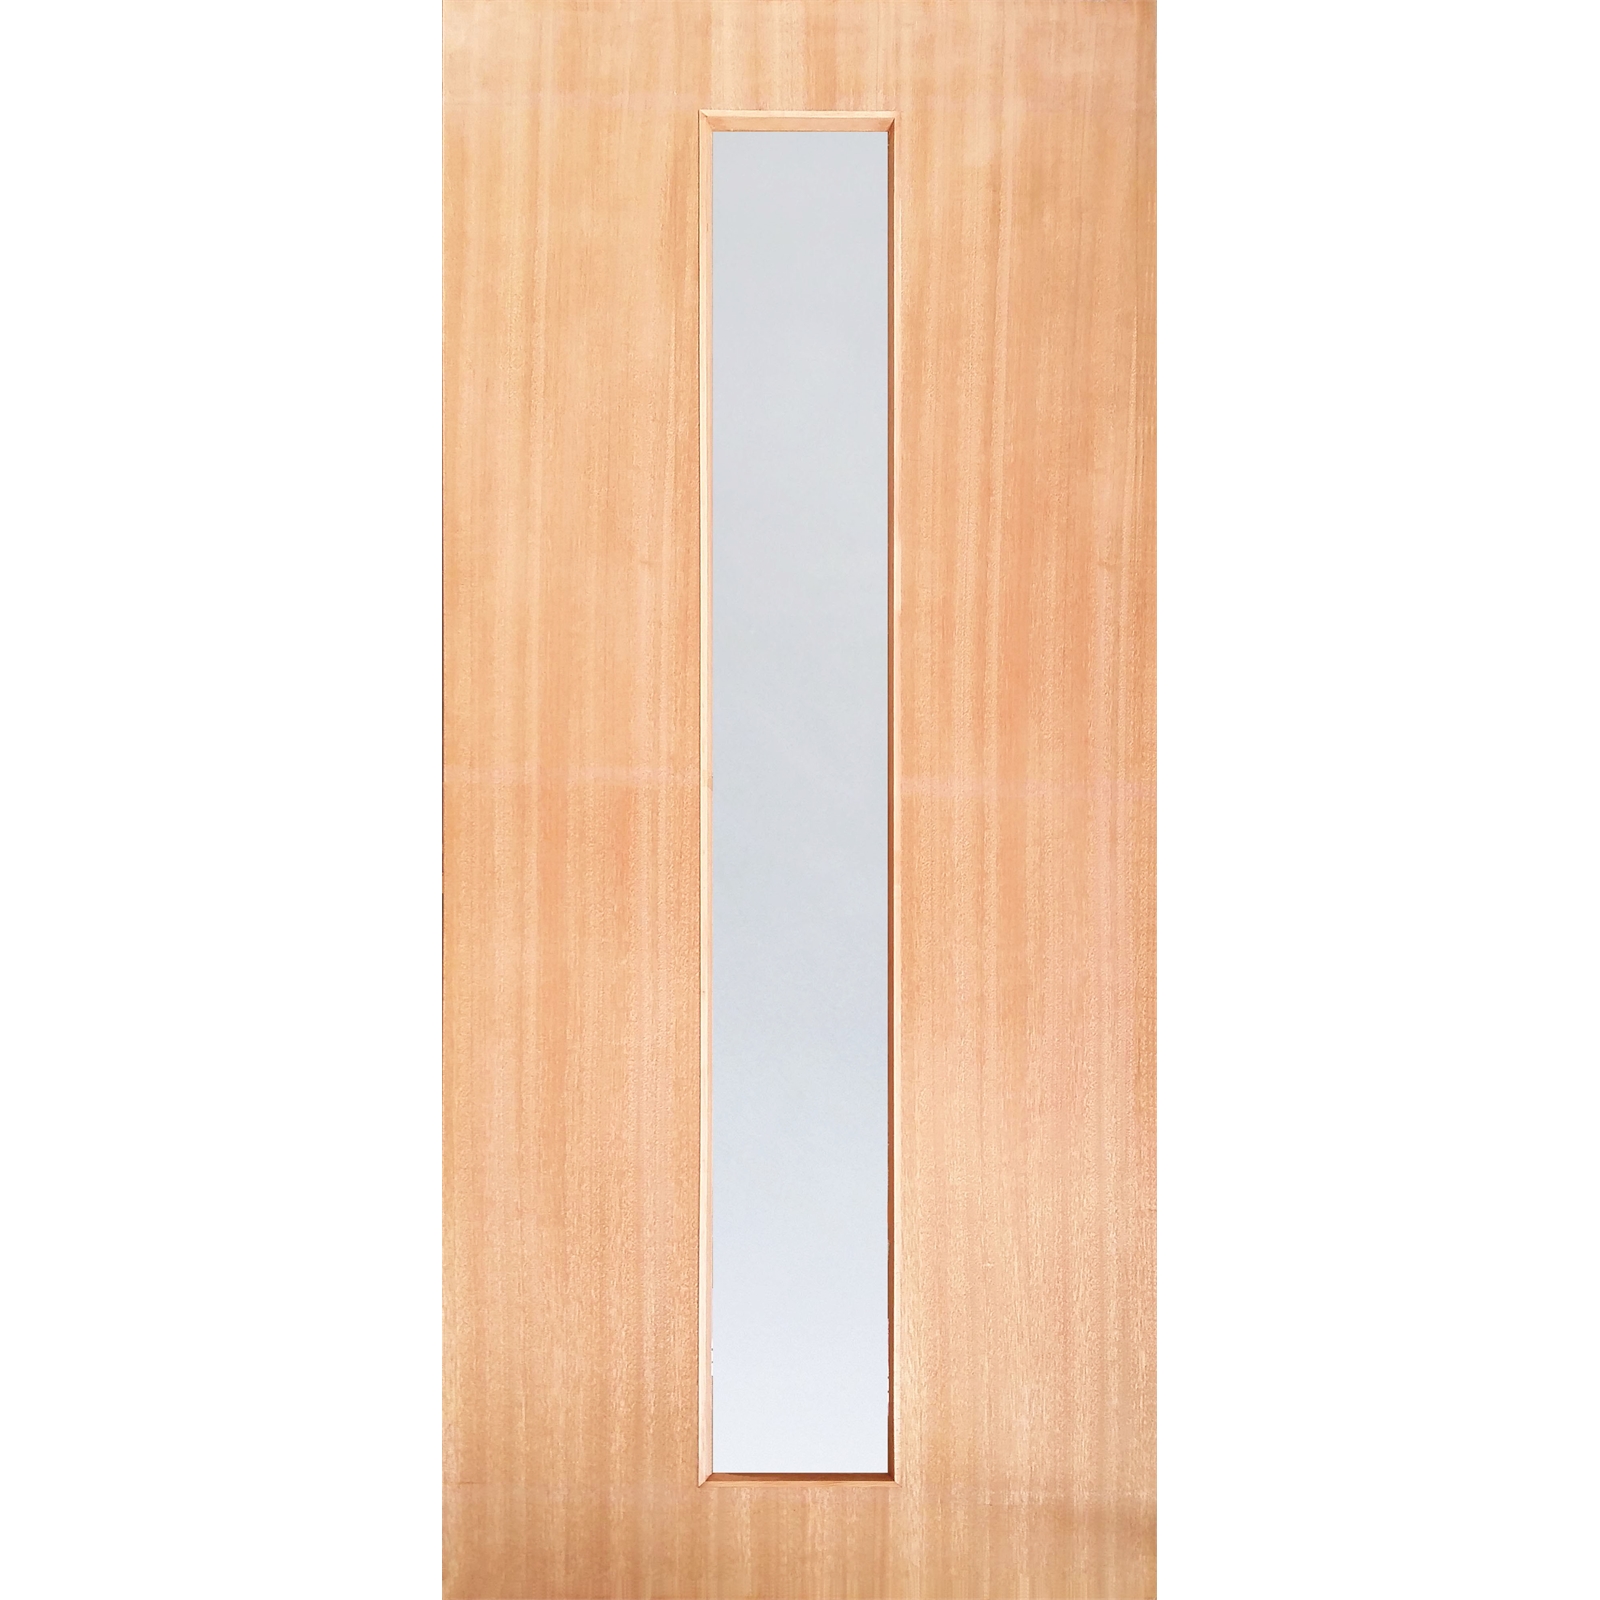 Woodcraft Doors 2040 x 820 x 40mm St Clair 02 Entrance Door With Frosted Safety Glass